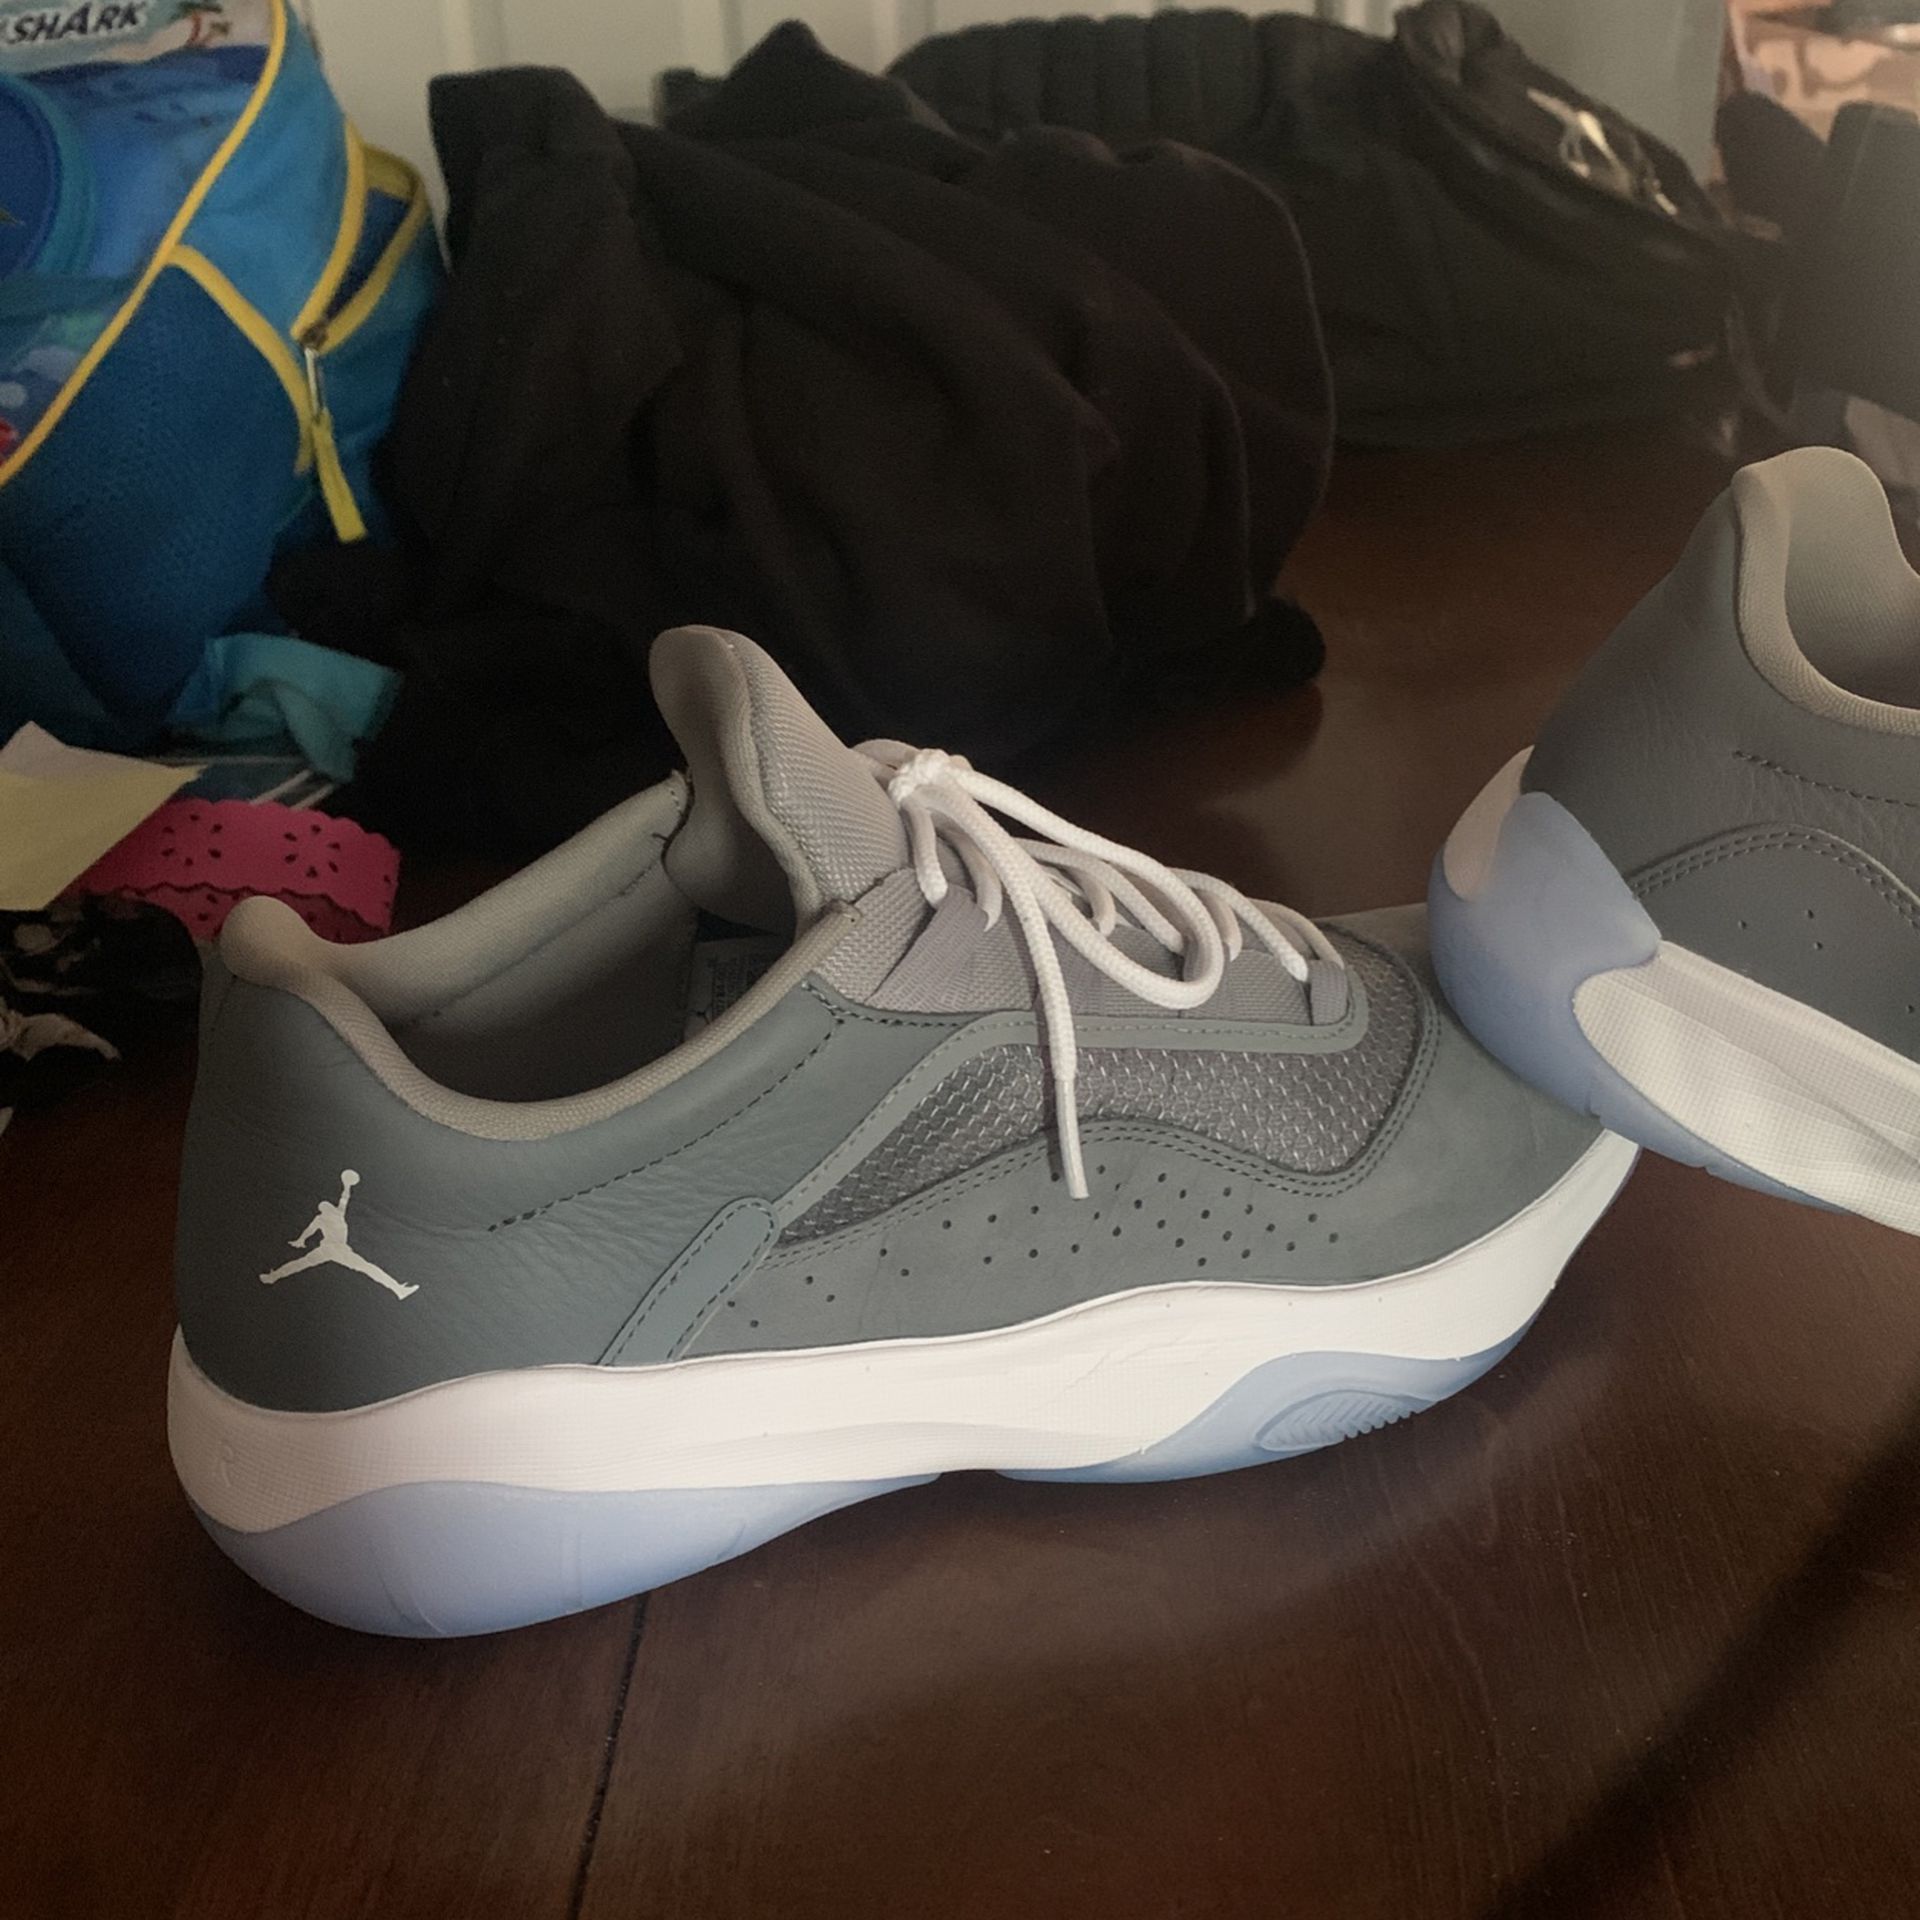 Air Jordan 11 Comfort Low Size 10.5 for Sale in Central Islip, NY - OfferUp